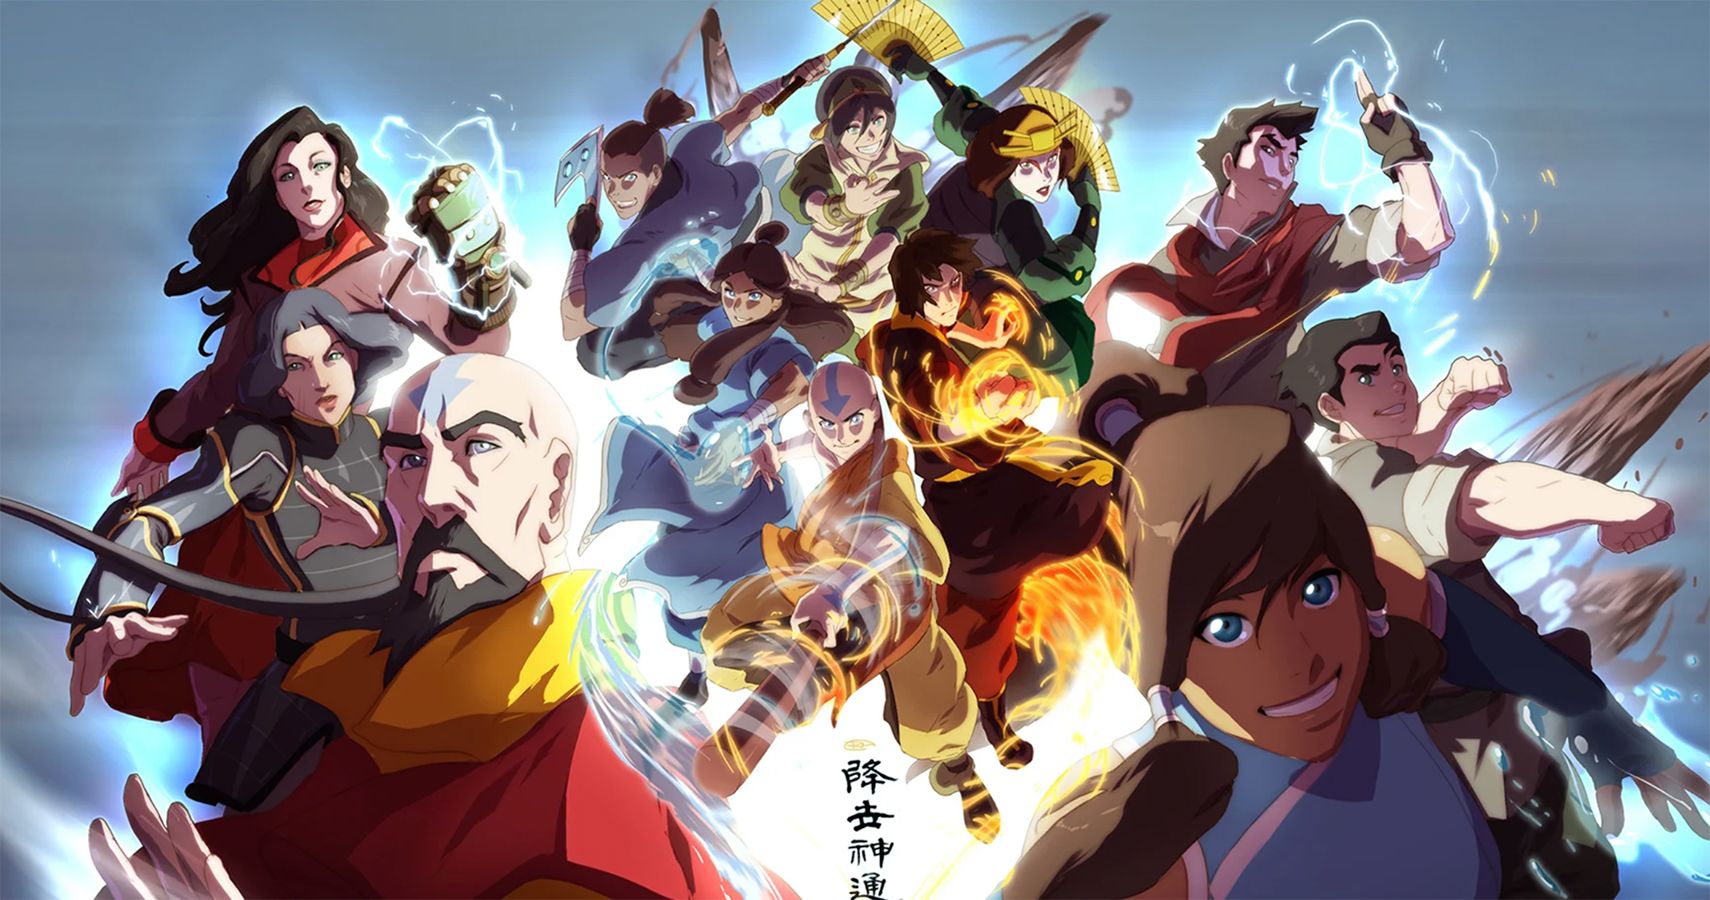 Avatar: The Legend of Korra Is Better Than The Last Airbender